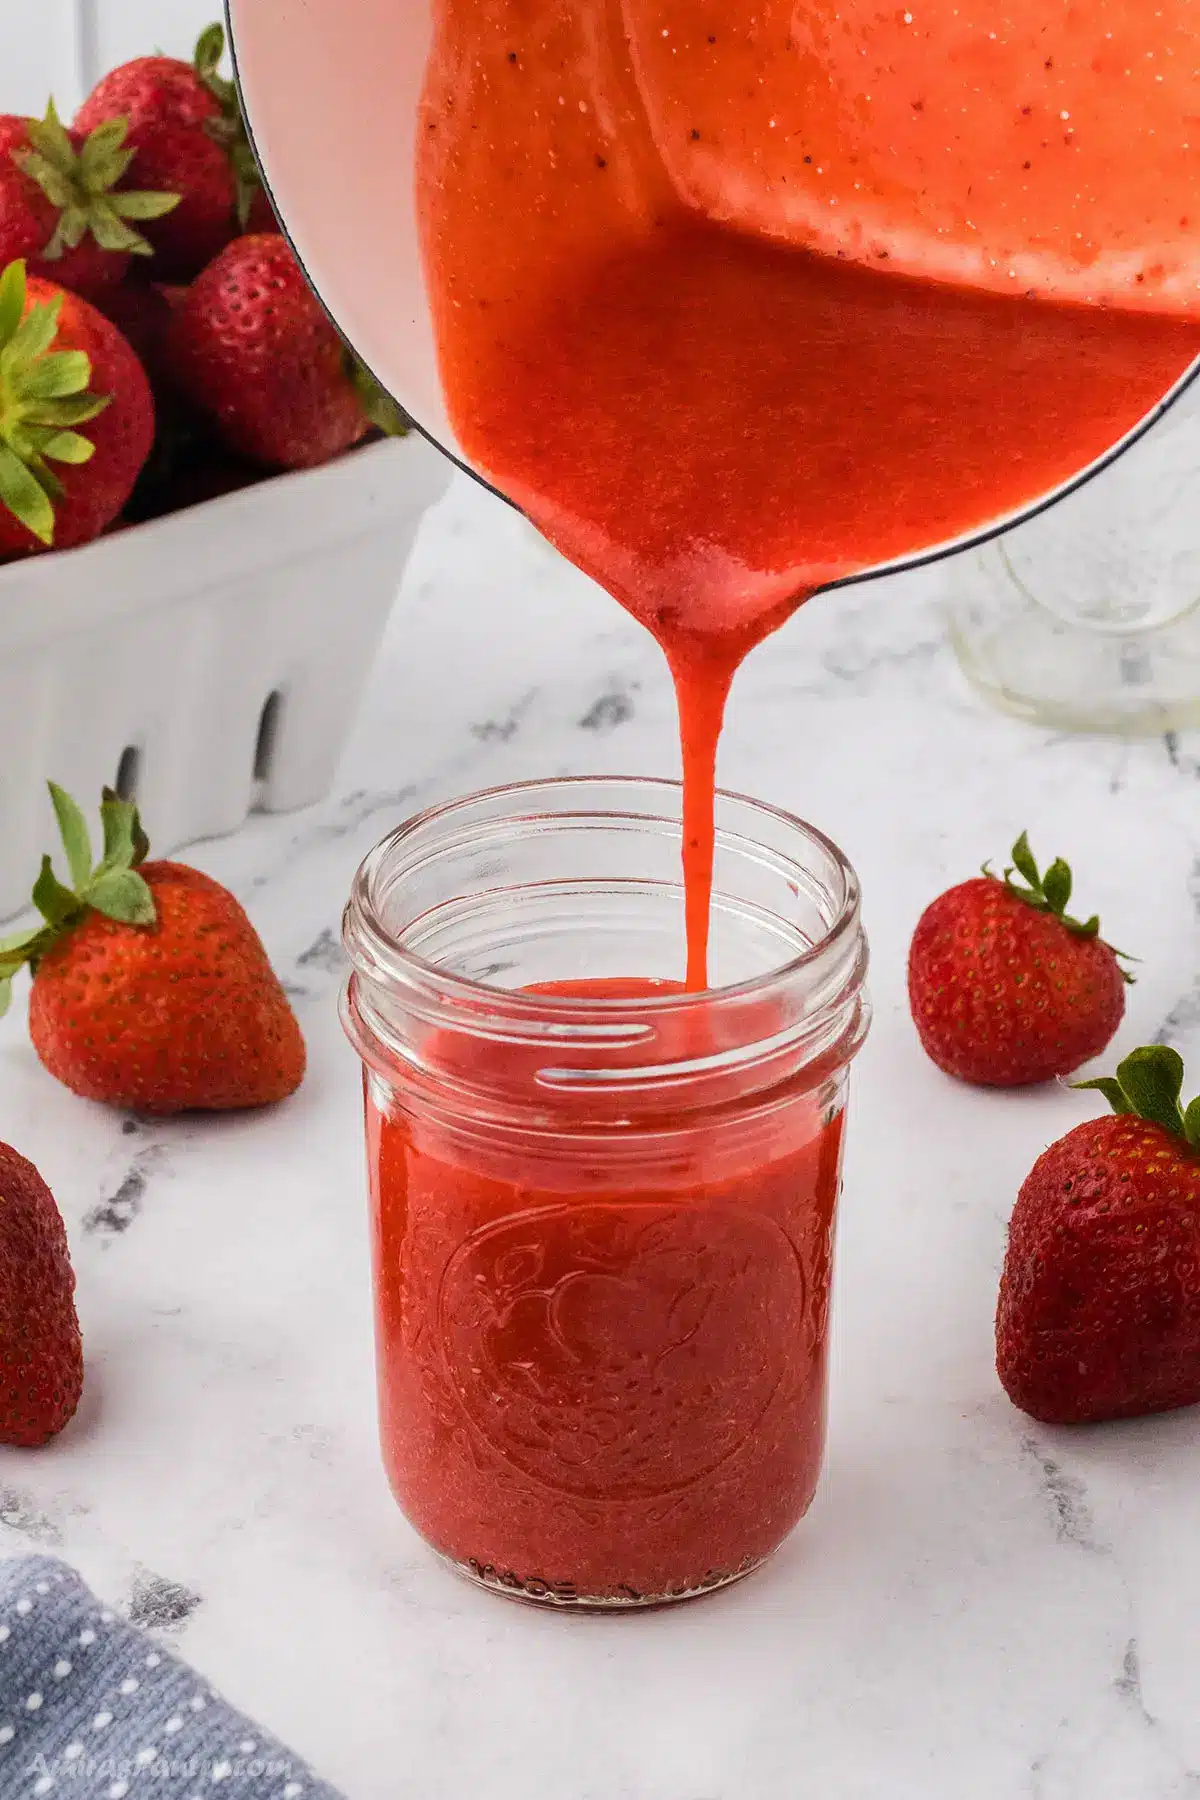 Strawberry sauce being poured into a jar.